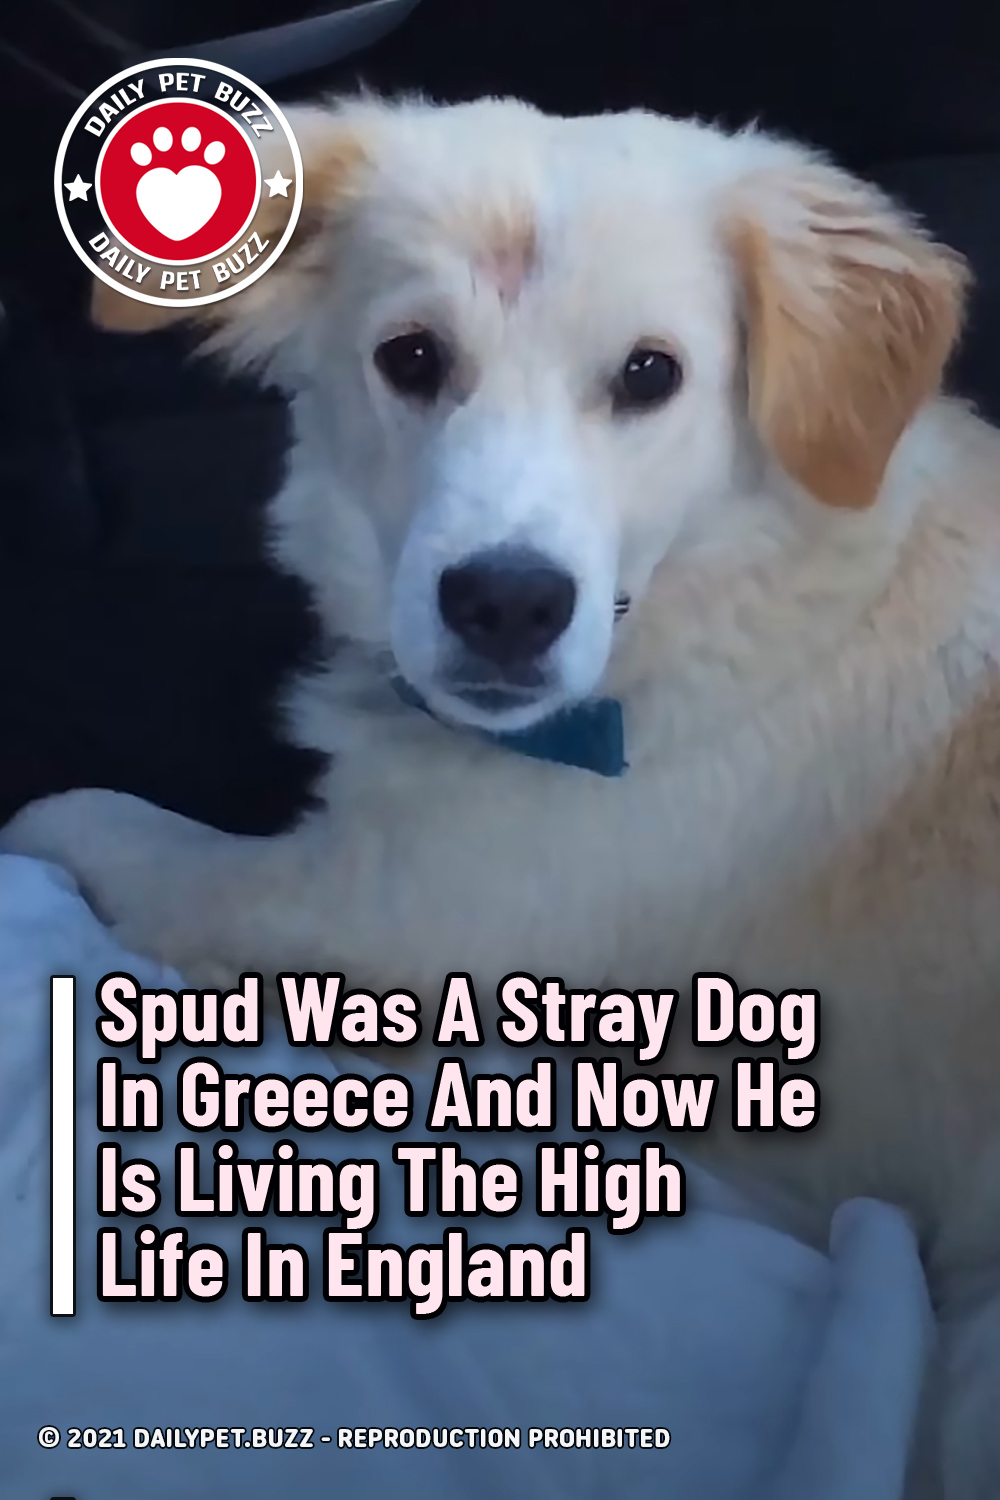 Spud Was A Stray Dog In Greece And Now He Is Living The High Life In England